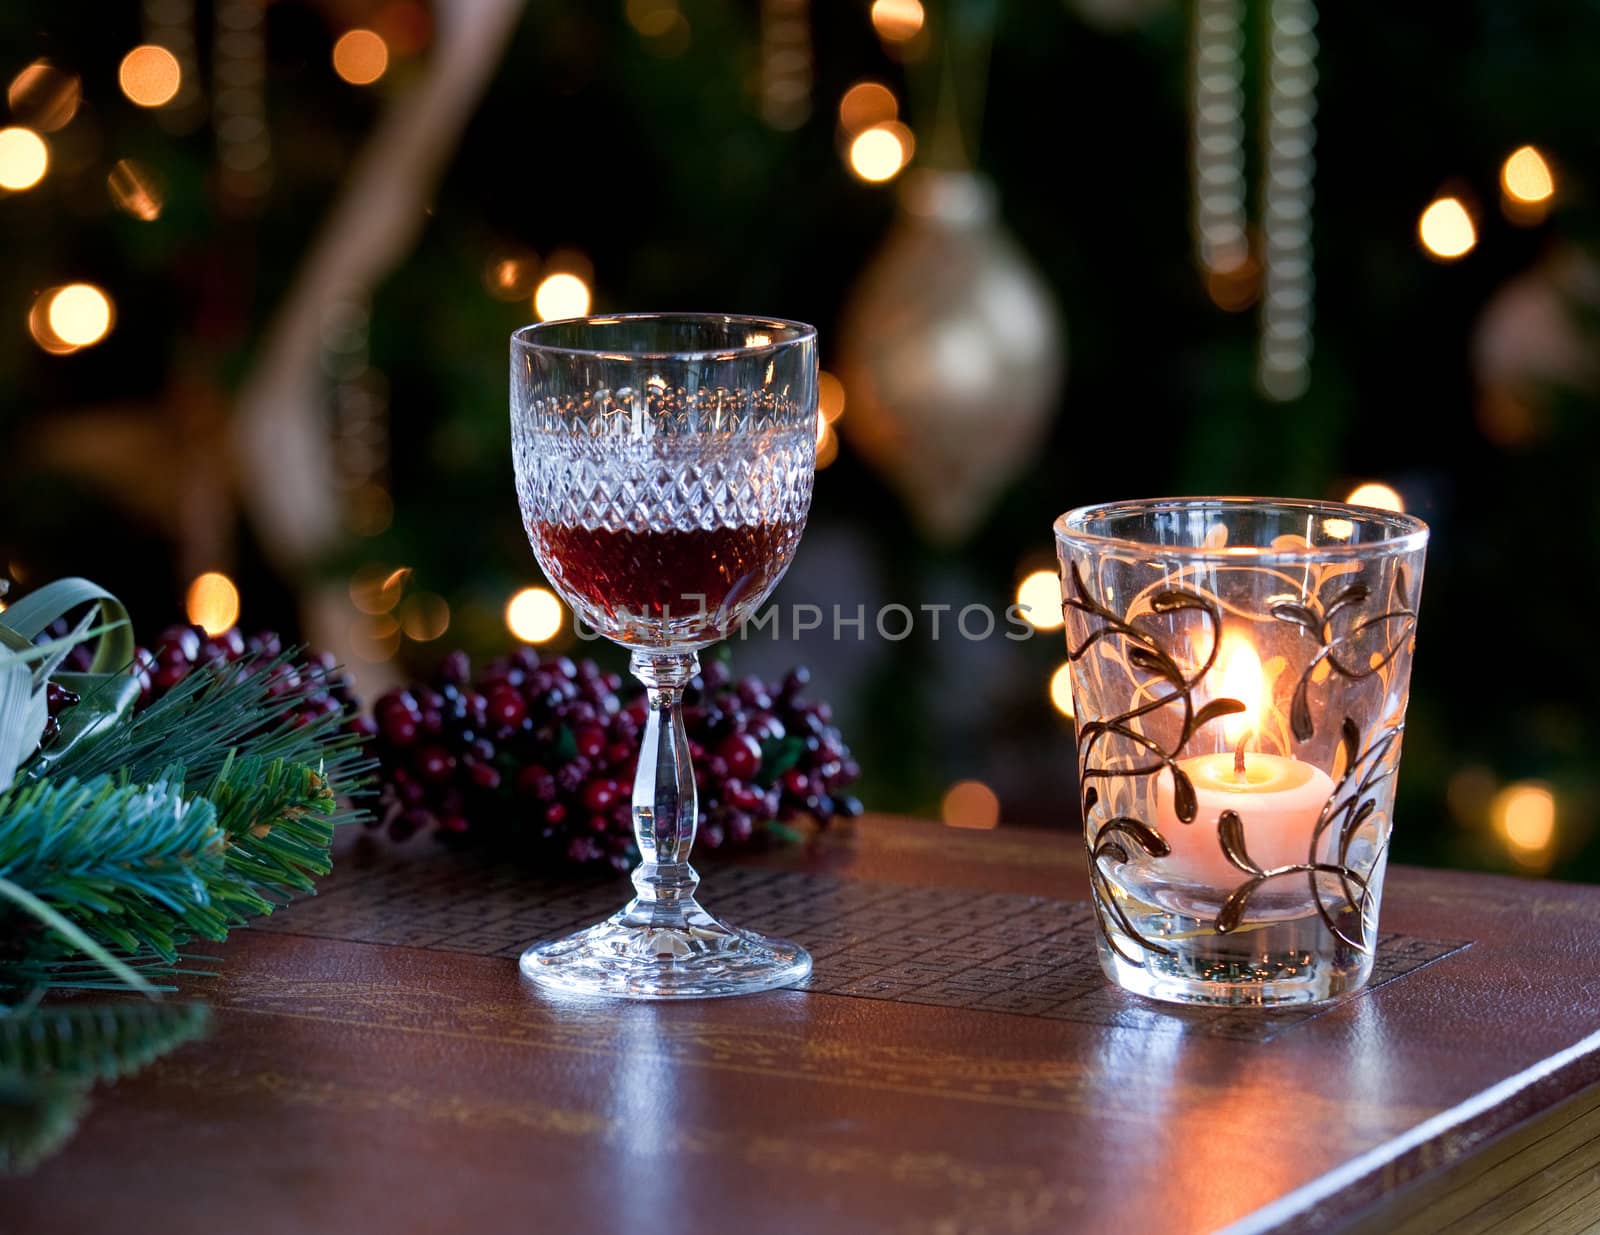 Glass of sherry or port by candlelight by steheap